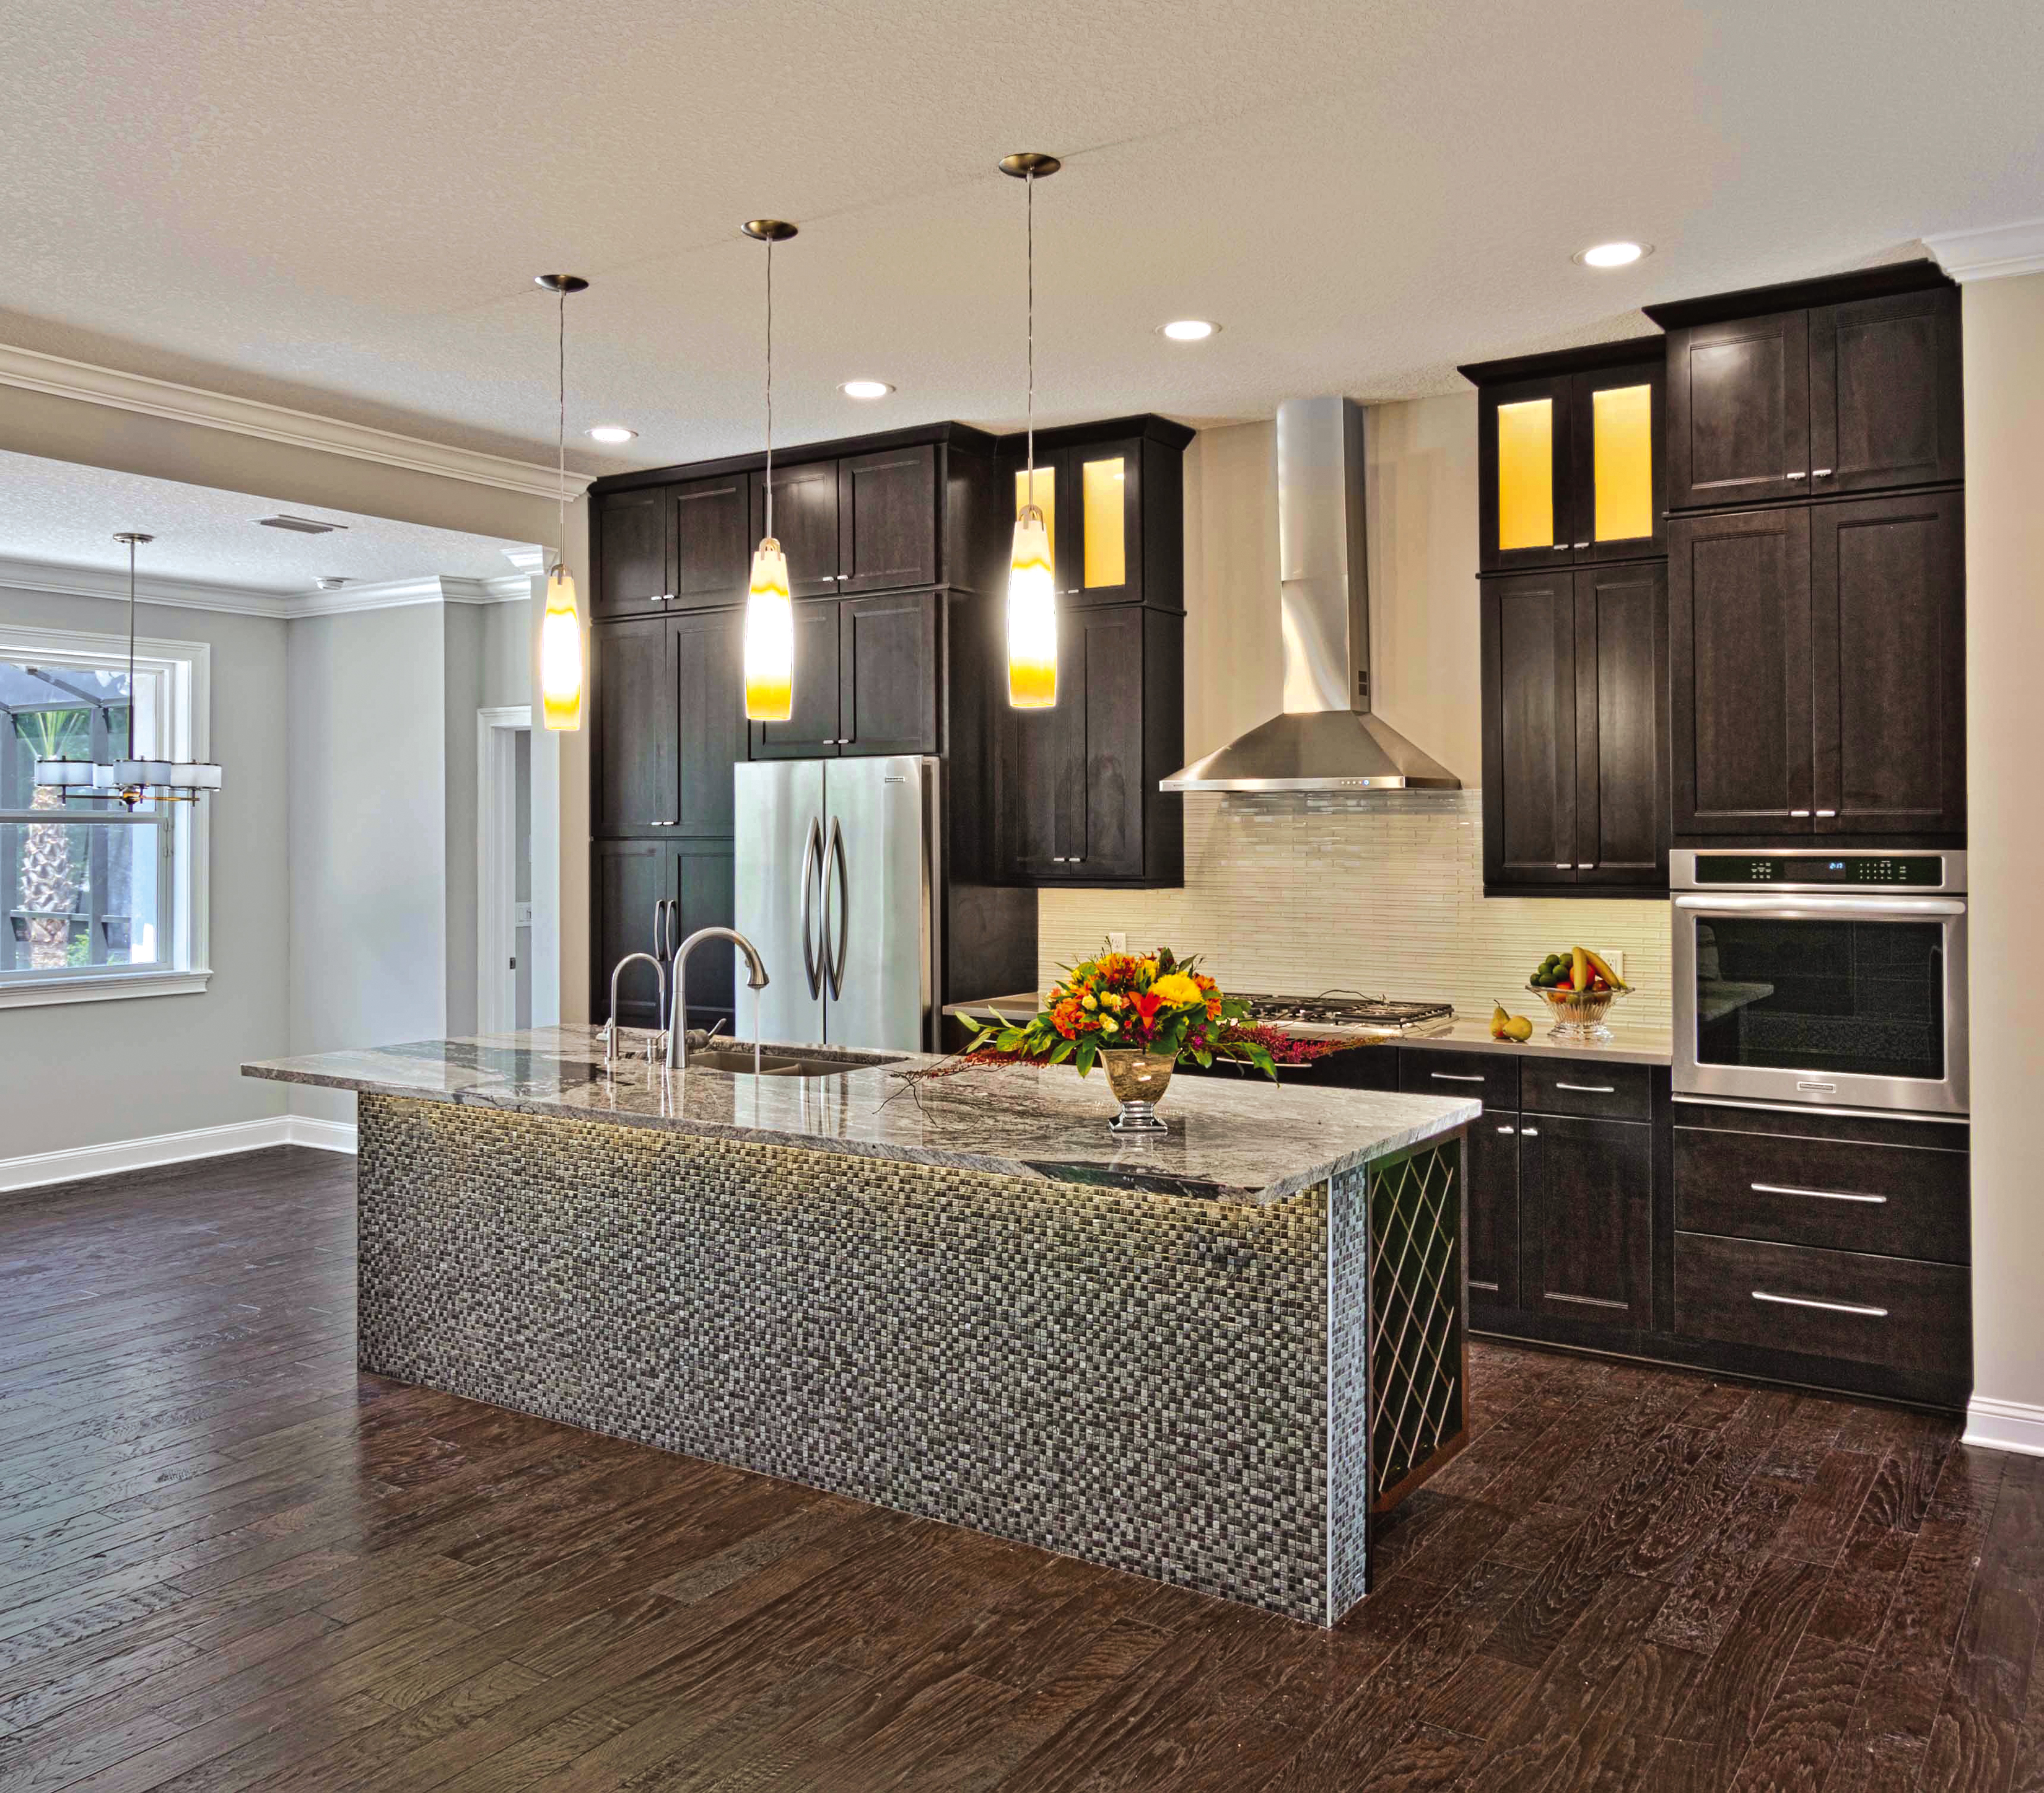 GRANITE KITCHEN COUNTERTOPS, TYPES OF EDGES AND STYLES OF GRANITE